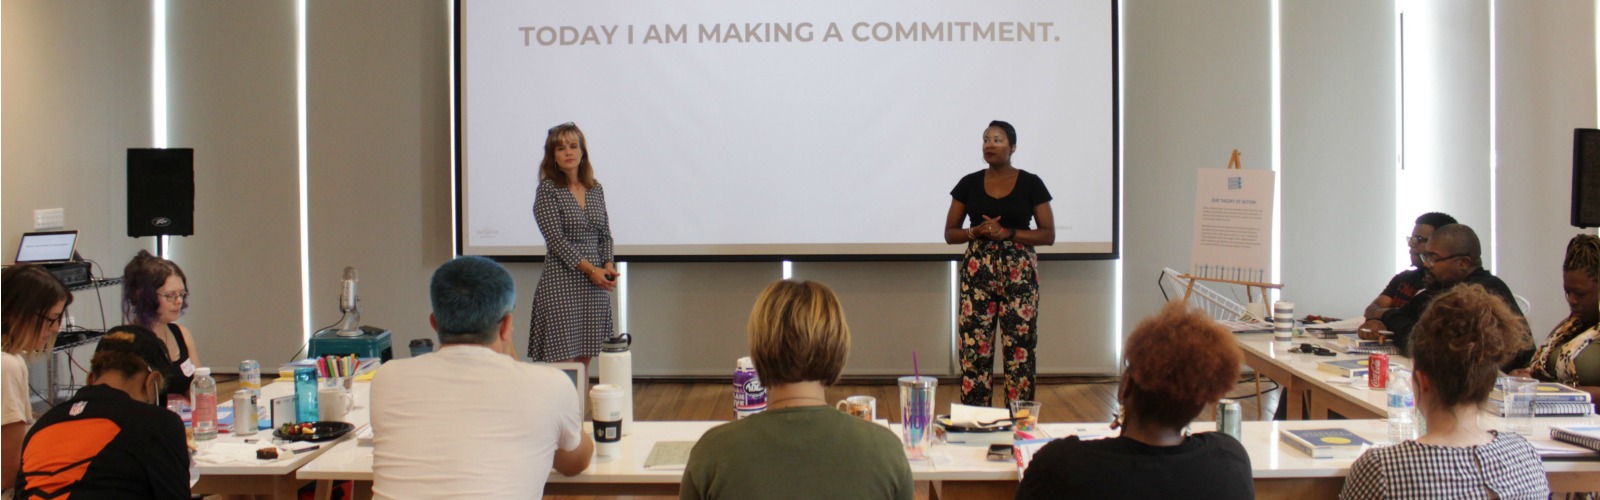 Consultants Marion Hodges Biglan and Jovian Zayne start by helping participants articulate their reasons for attending and potential positive outcomes.